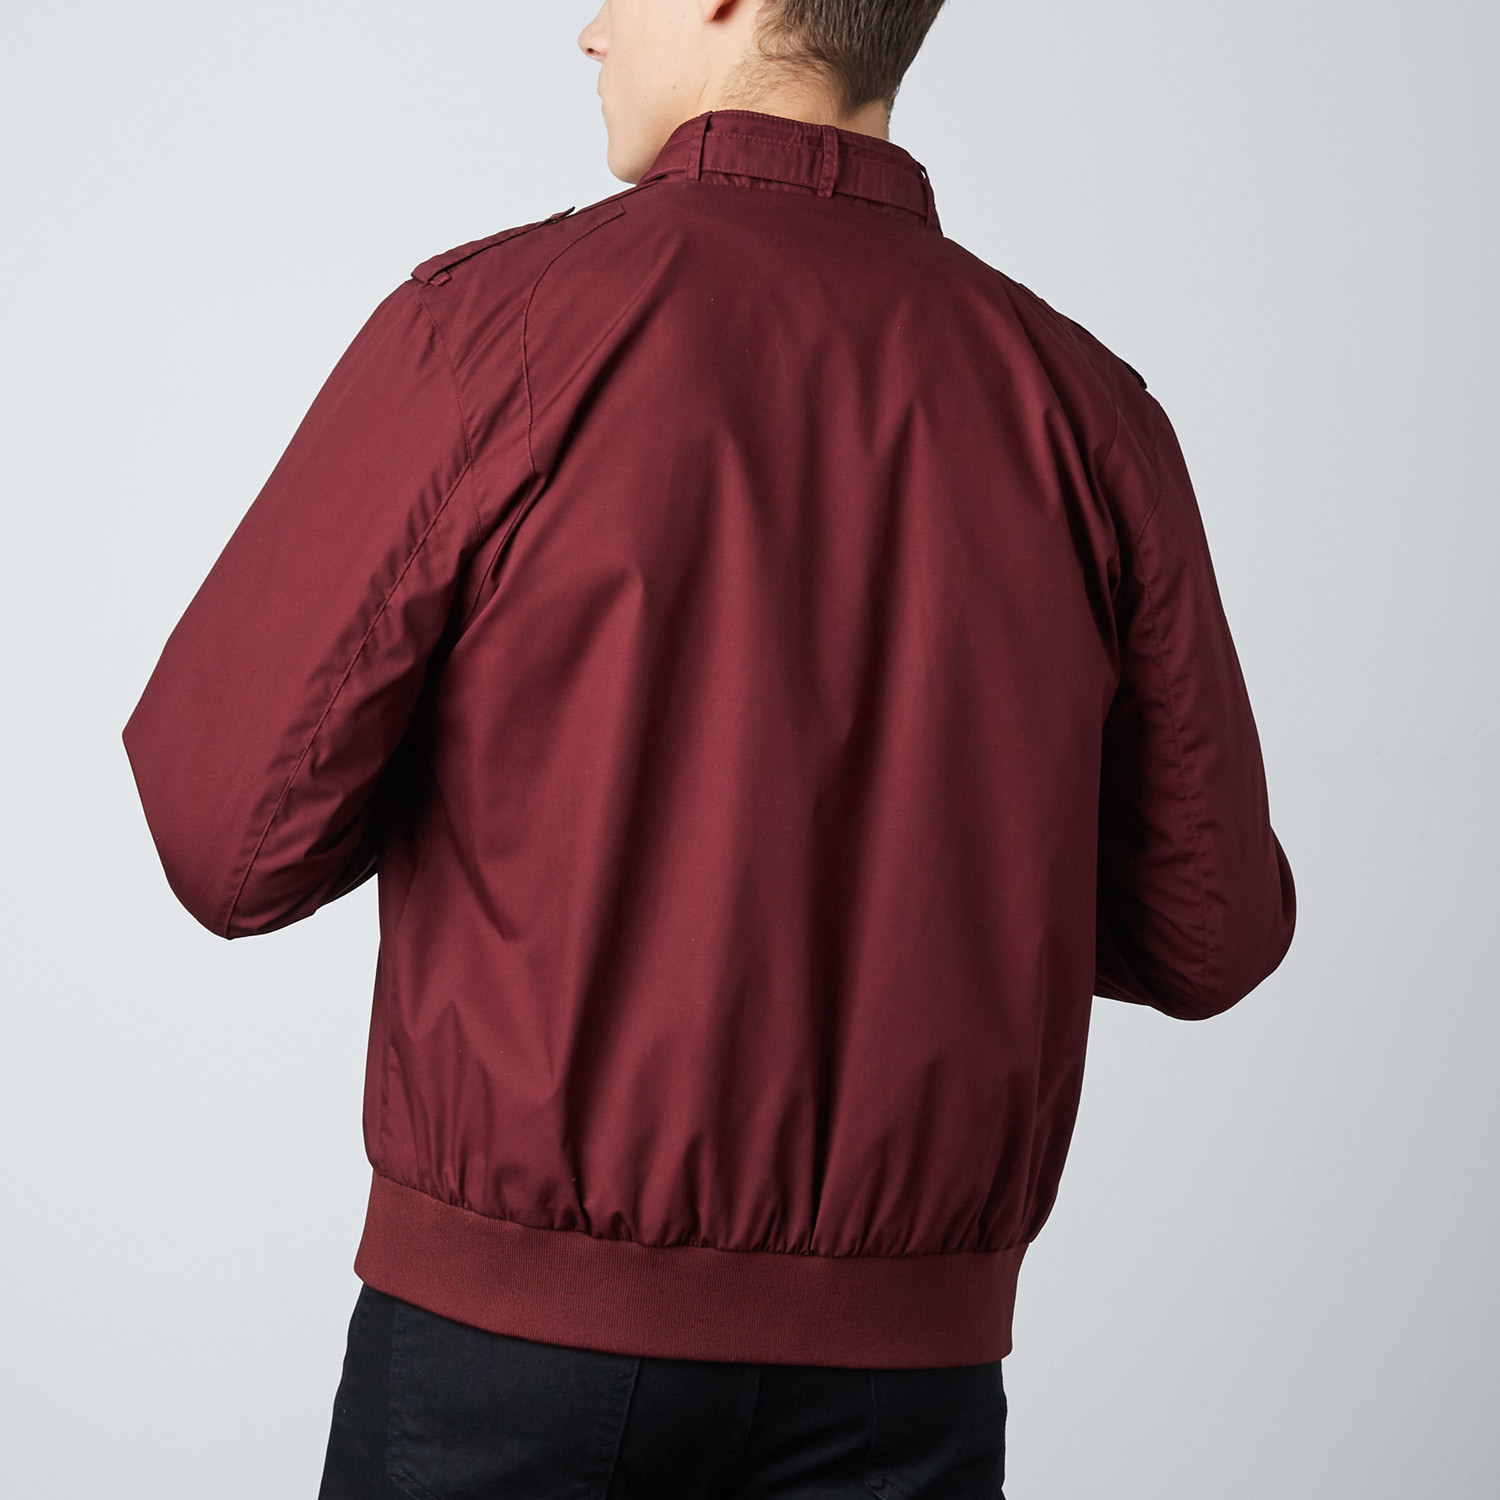 Iconic Racer Jacket // Burgundy (S) - Members Only - Touch of Modern